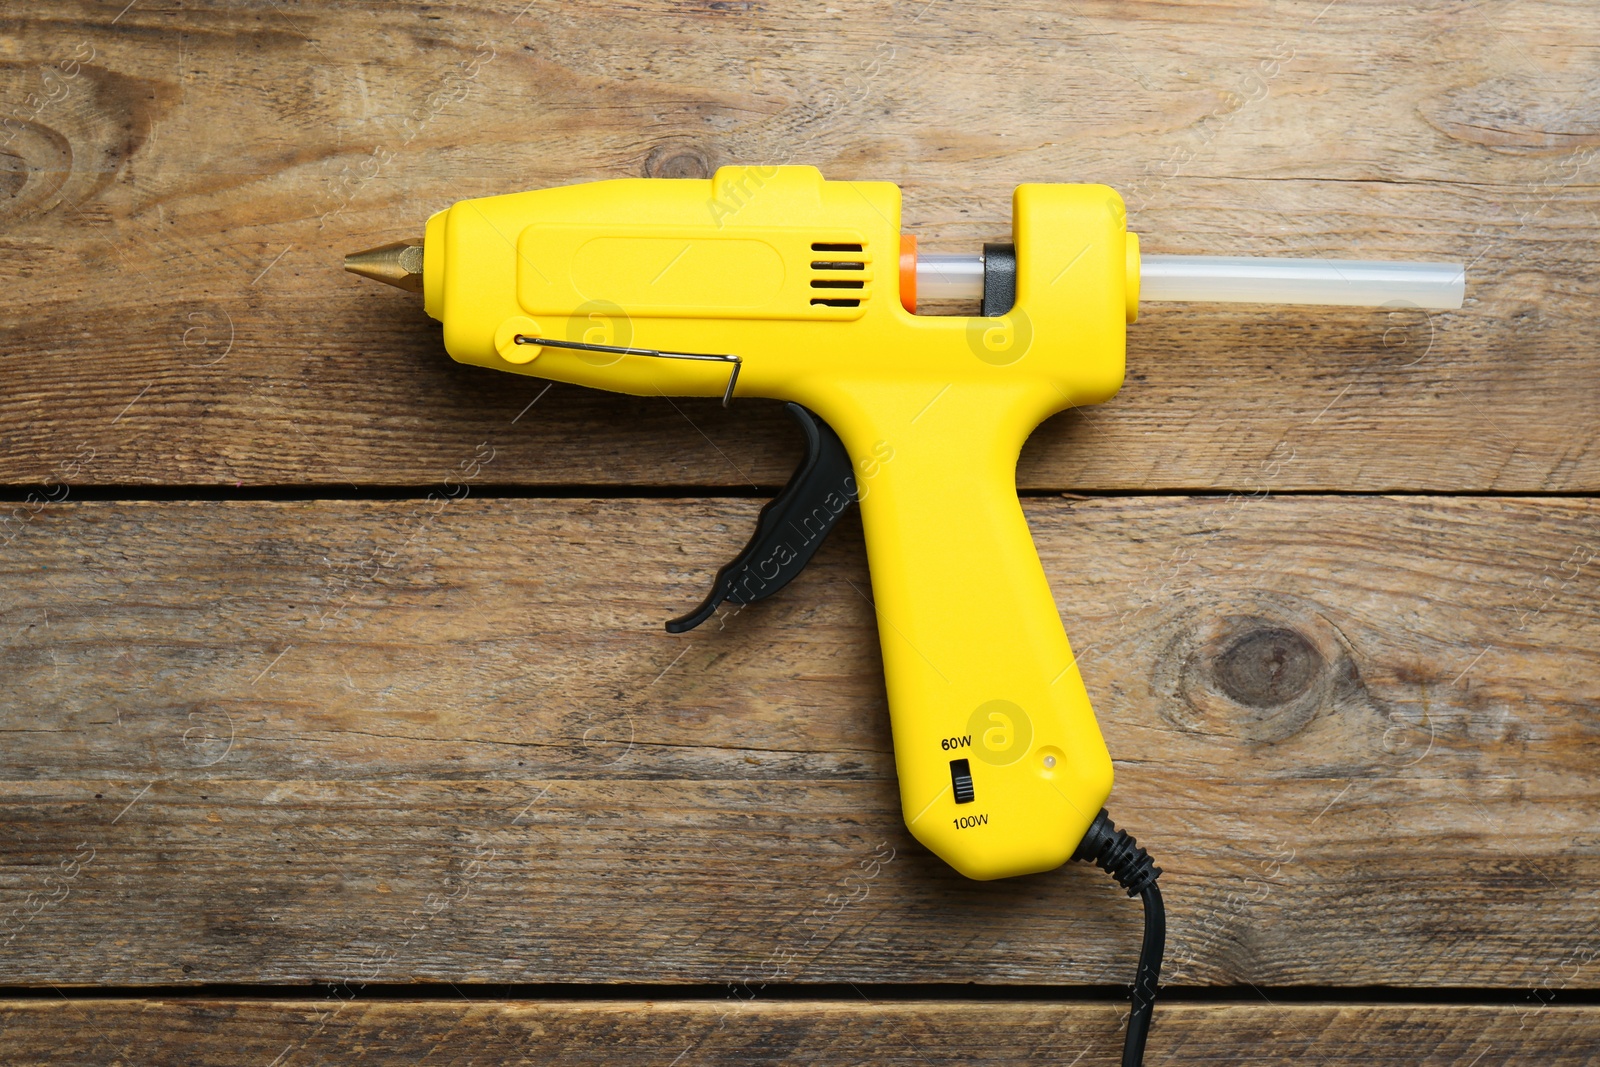 Photo of Yellow glue gun with stick on wooden table, top view